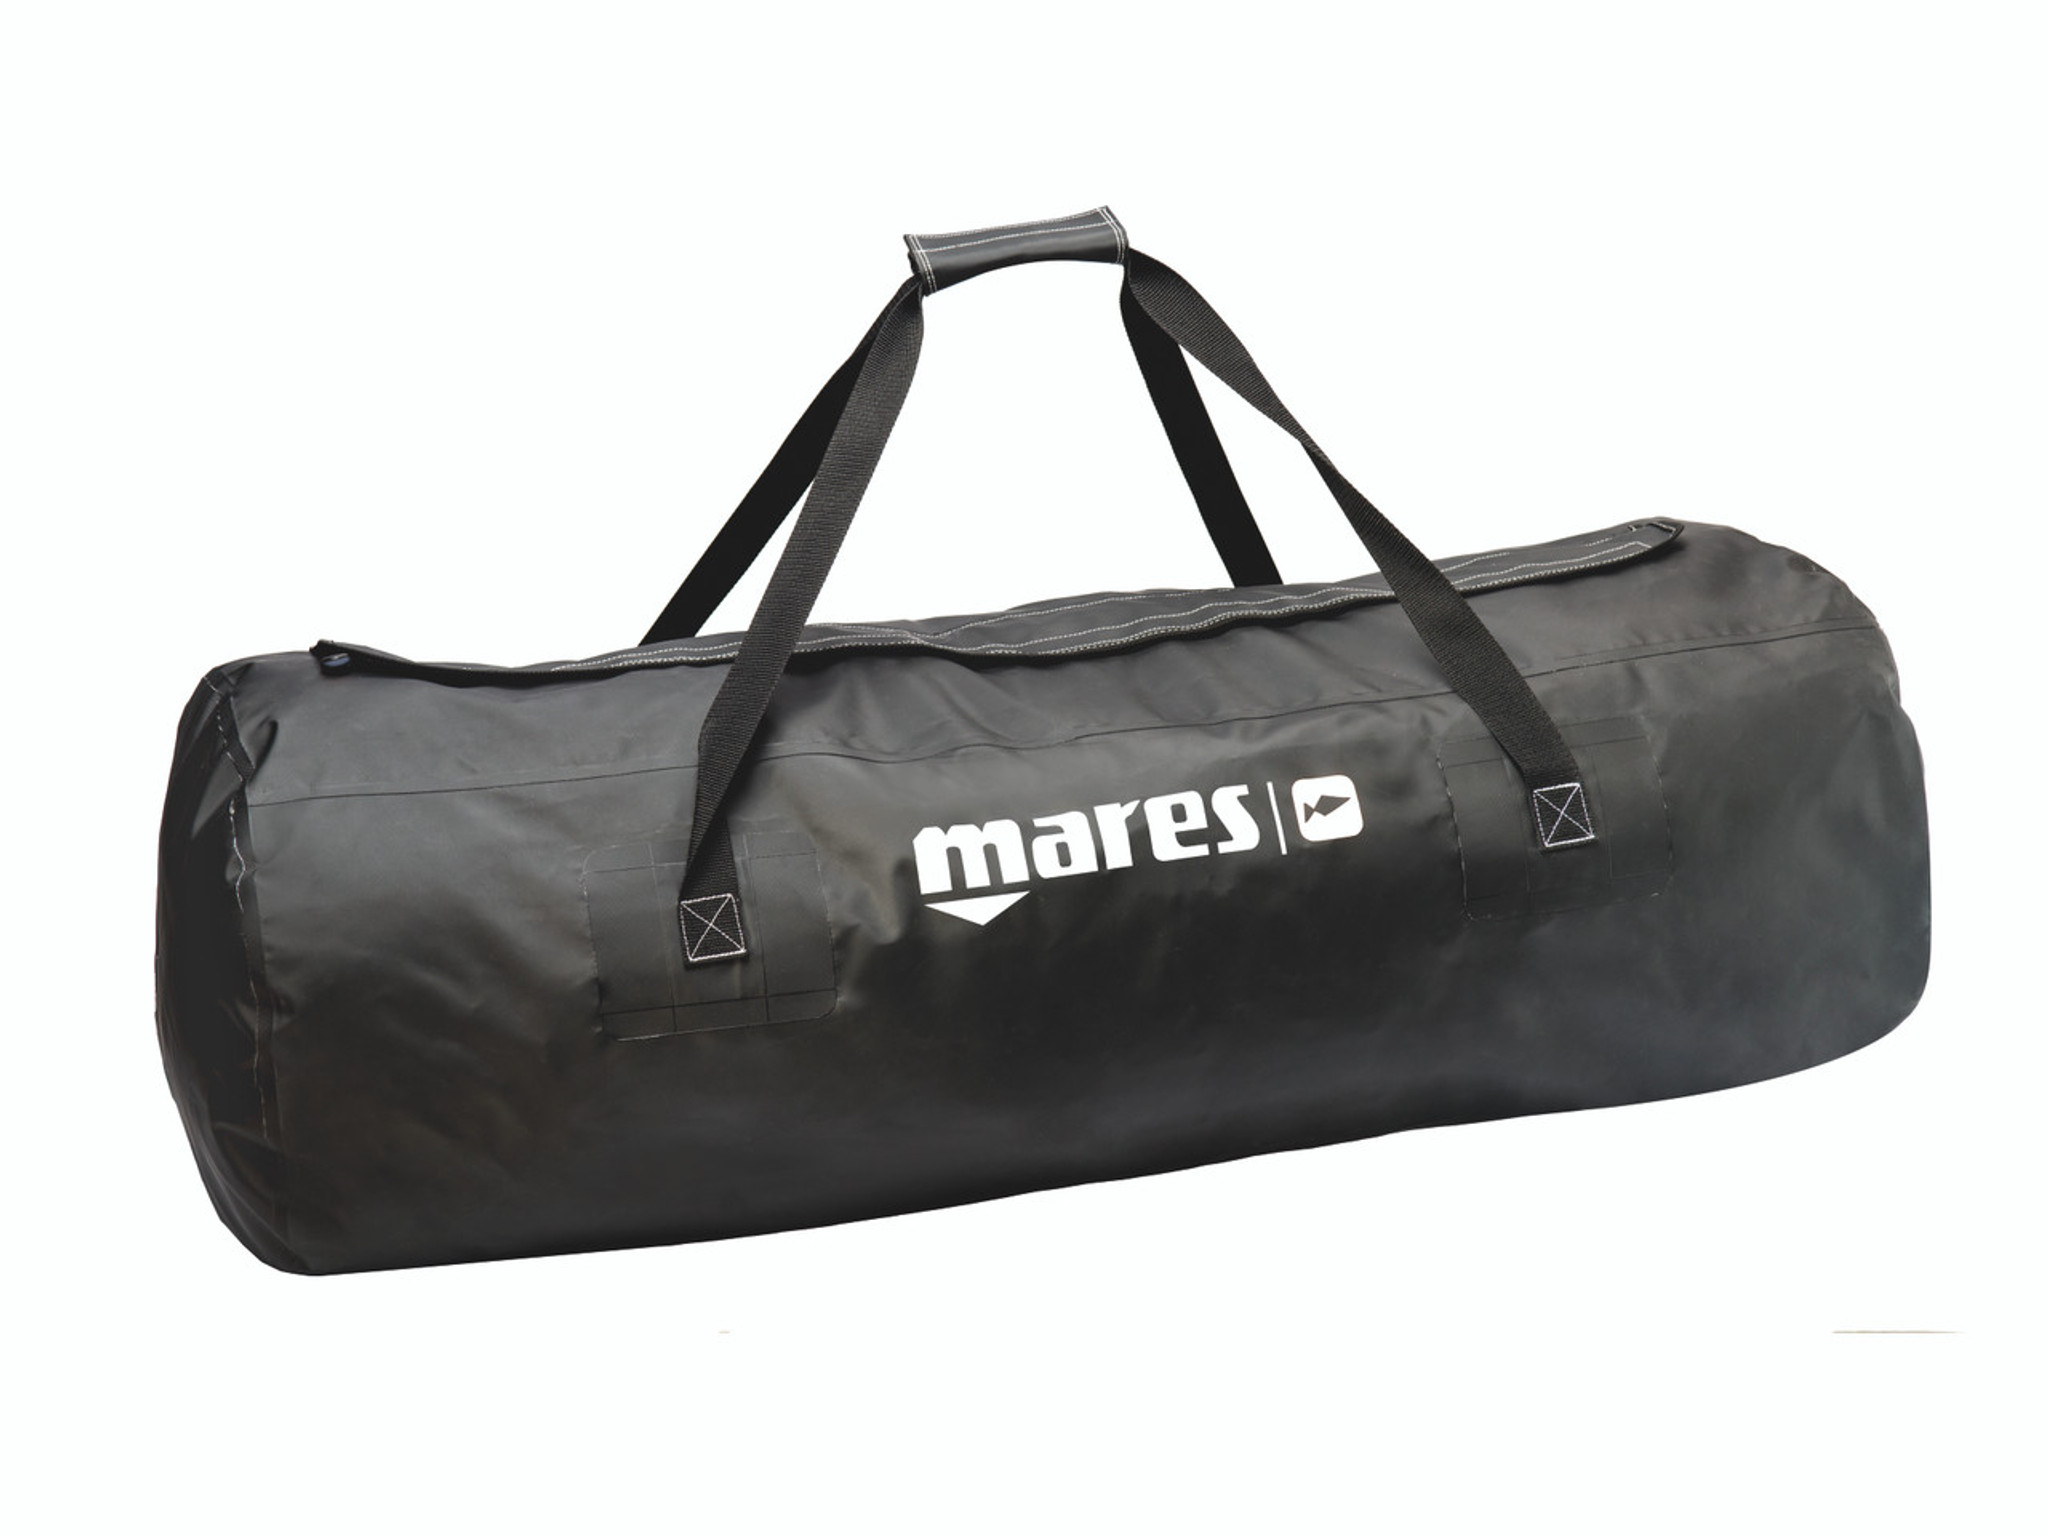 Mares Attack 100 Bag Duffle Gear Spearfishing Bag 425560 - Coral Sea Scuba  & Water Sports